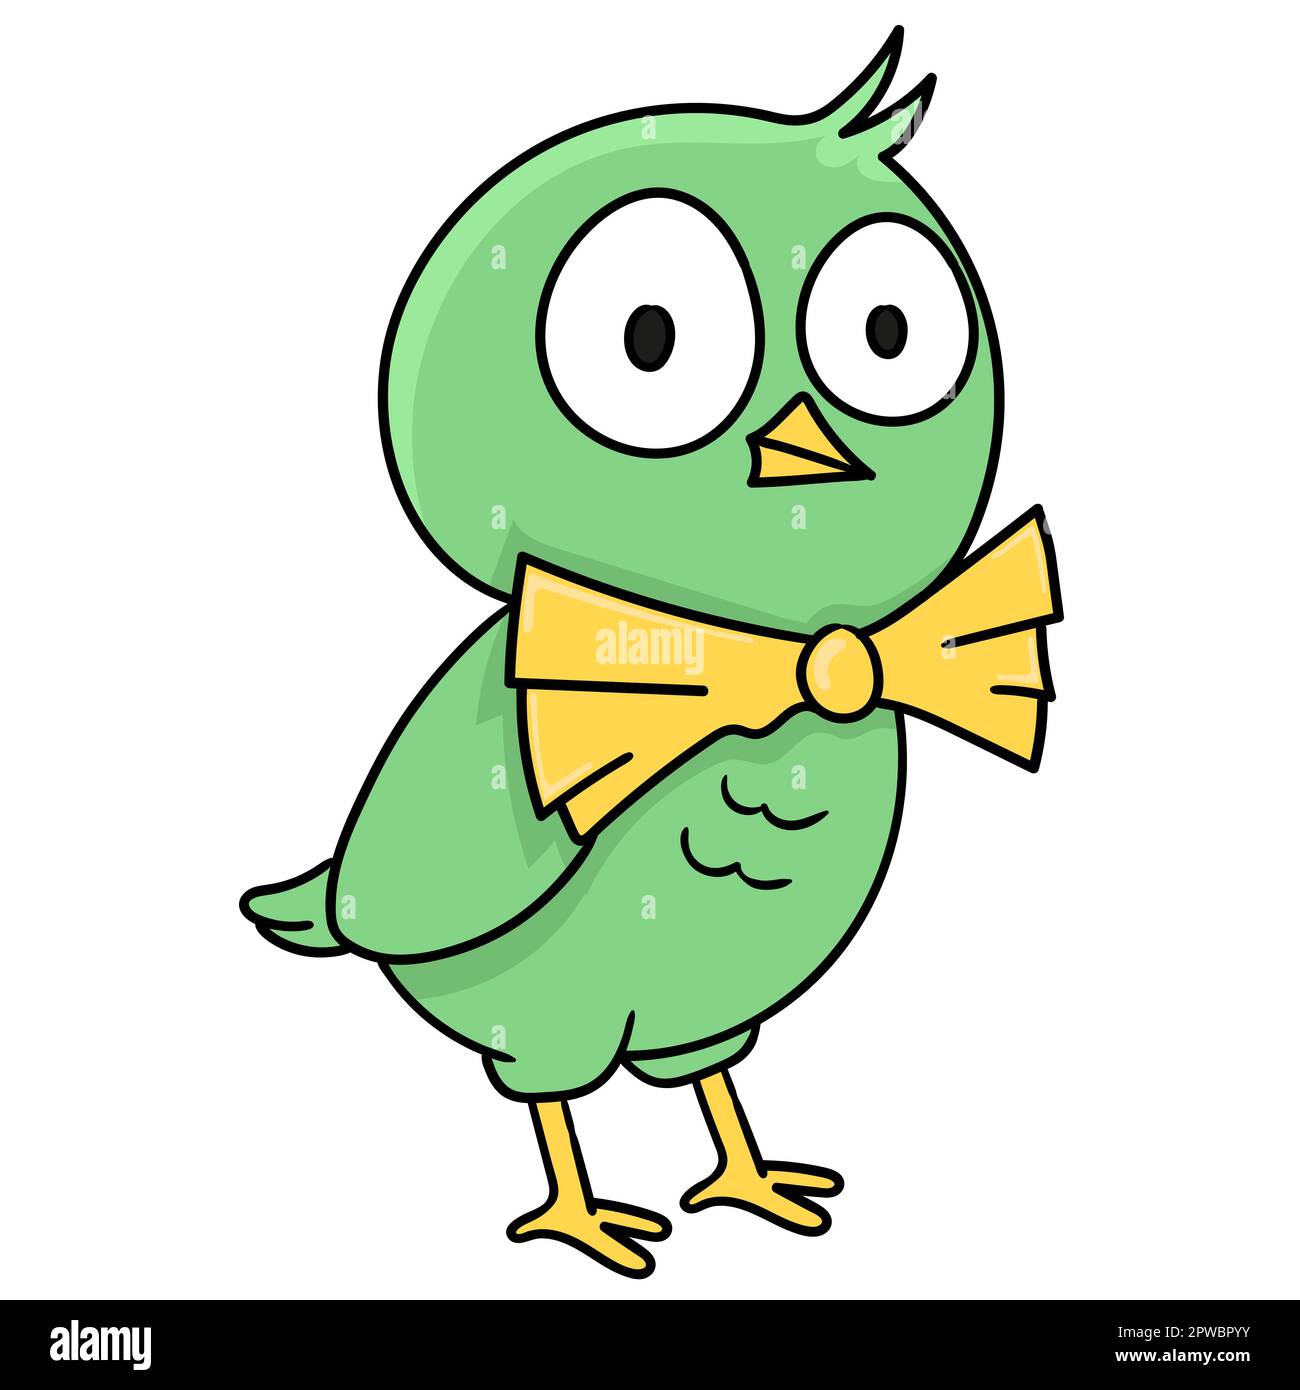 cute and funny green bird. doodle icon image Stock Vector